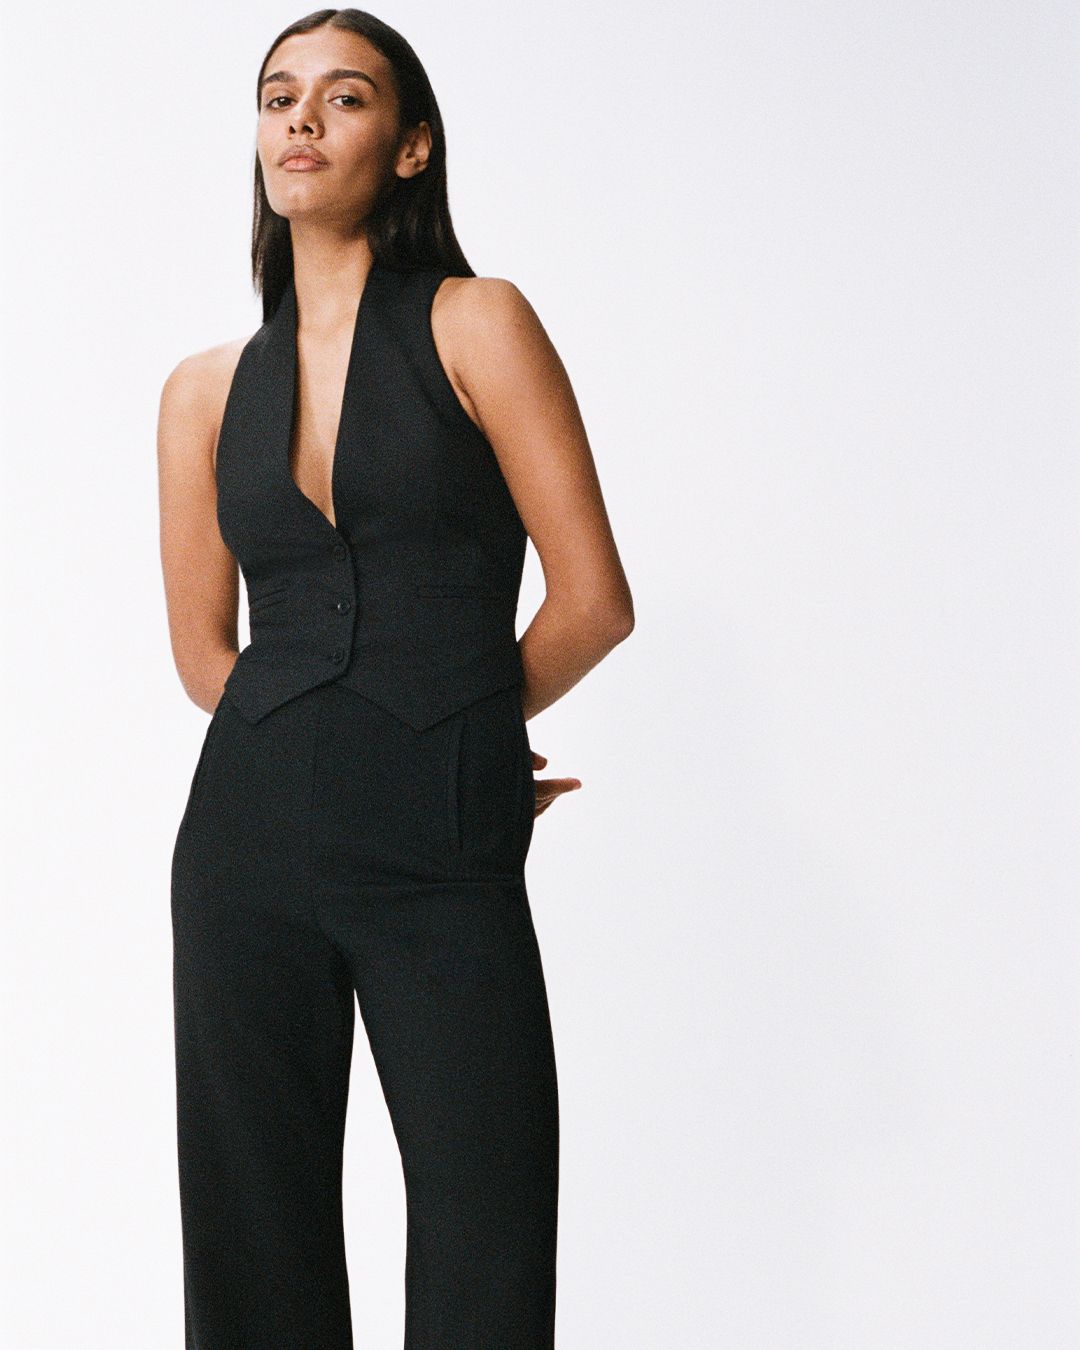 Madeleine Madden standing strong with hands behind her back wearing black tailored twill vest and high waisted trousers